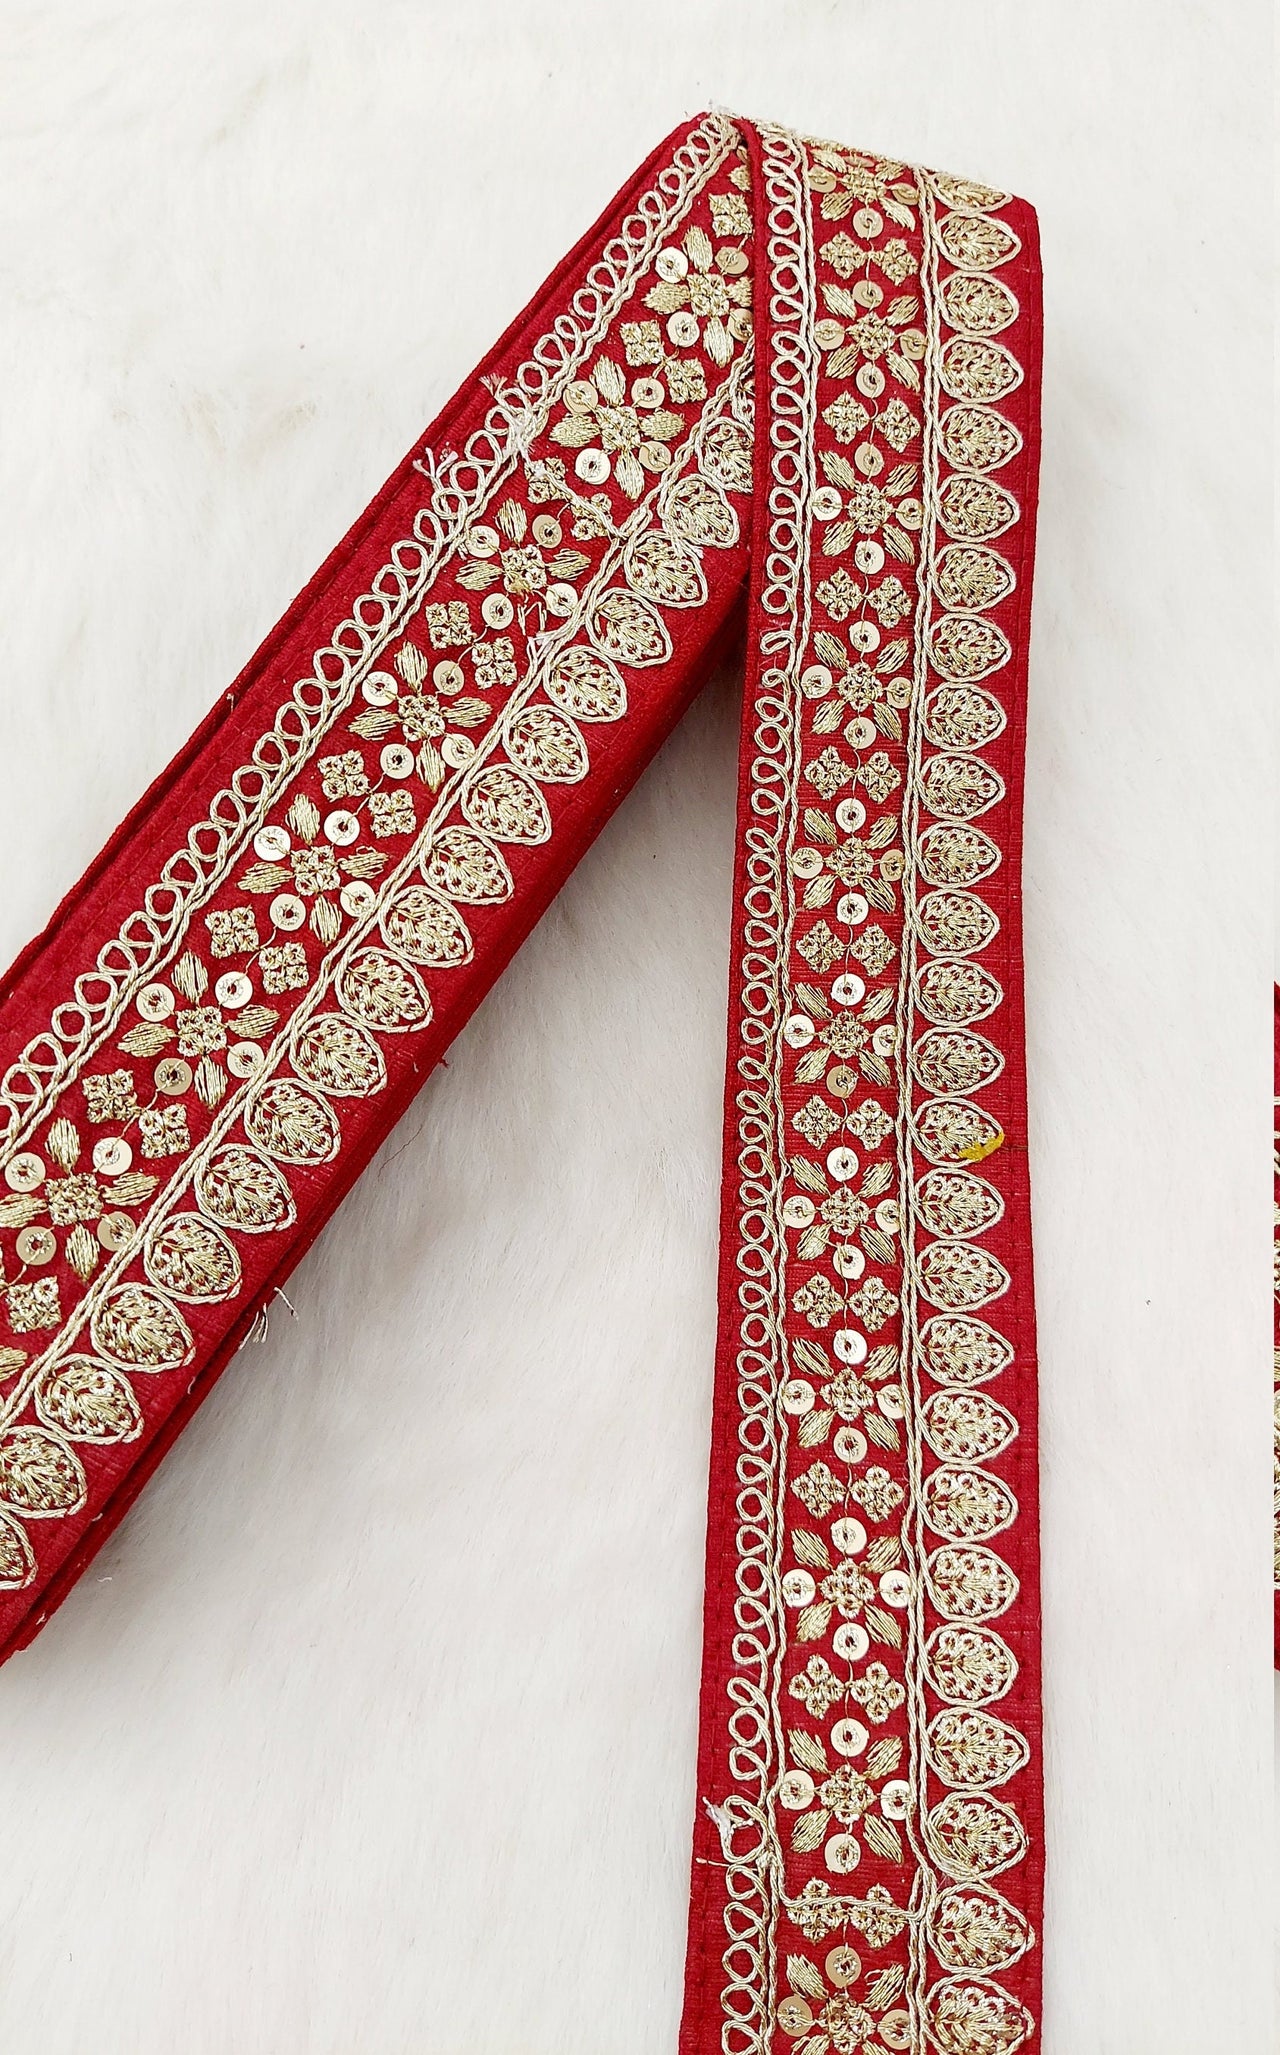 Maroon Red Art Silk Fabric Trim With Gold Floral Embroidery, Floral Sequins Sari Border, Trim By 9 Yards